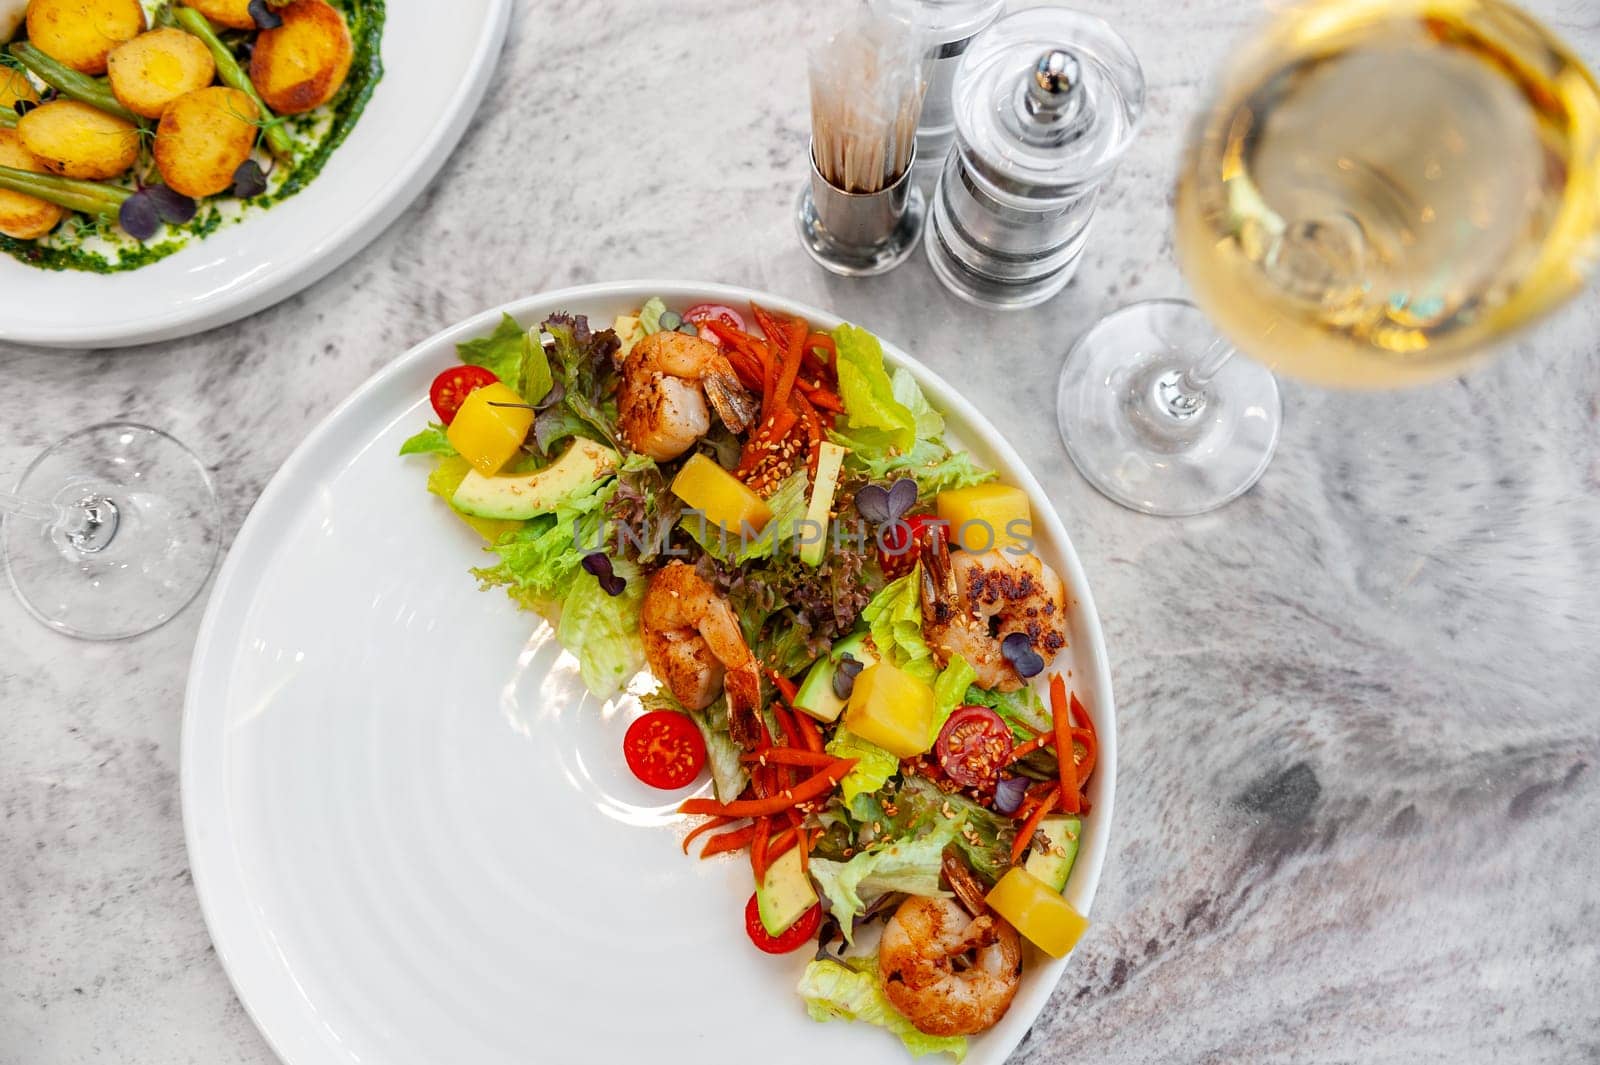 Salad with fried shrimp, mango, avocado and cherry tomatoes on a white plate. High quality photo